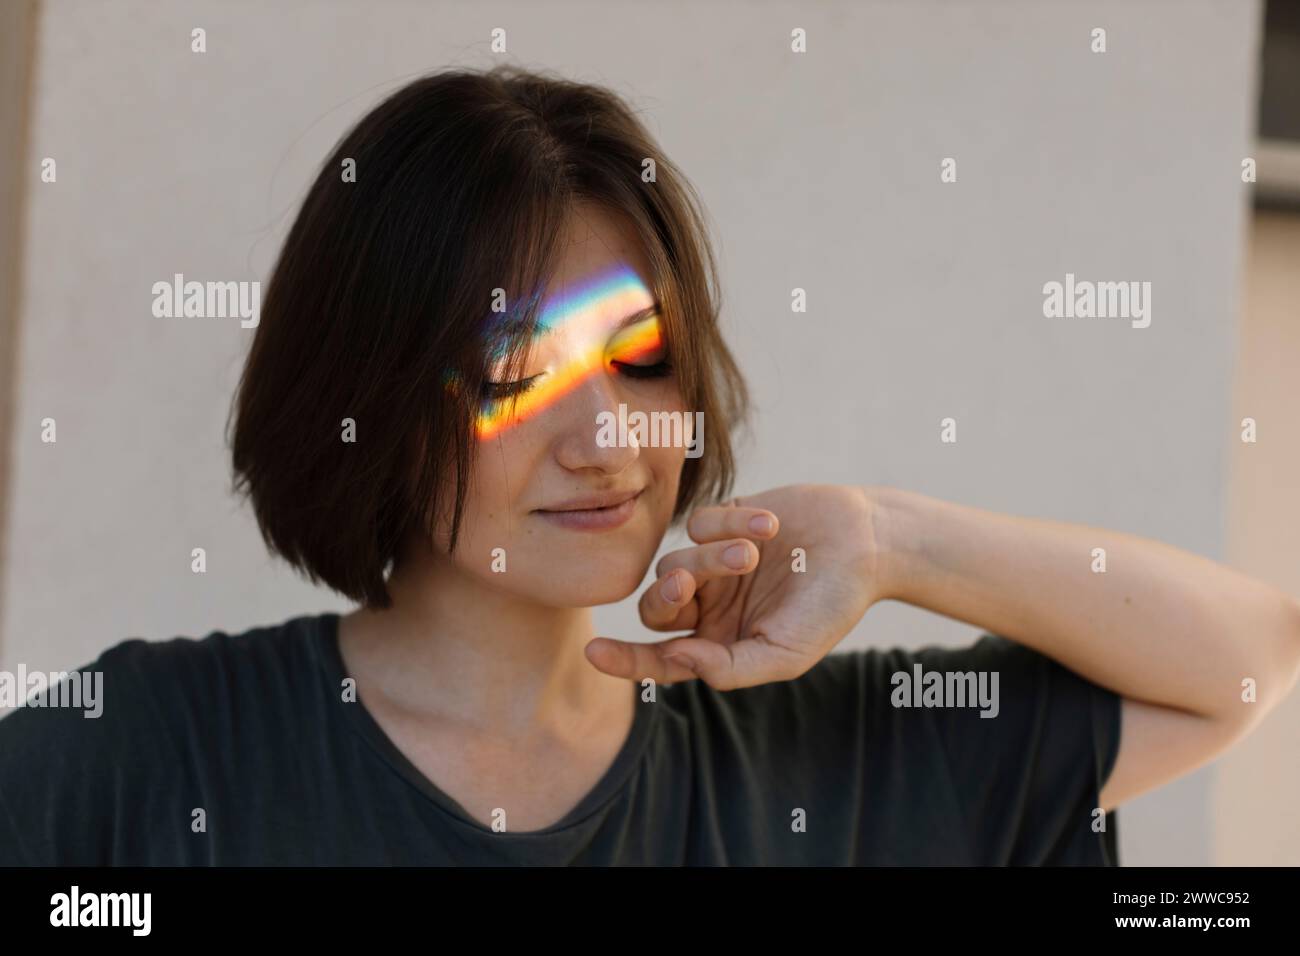 Woman with rainbow colored light reflection on face Stock Photo